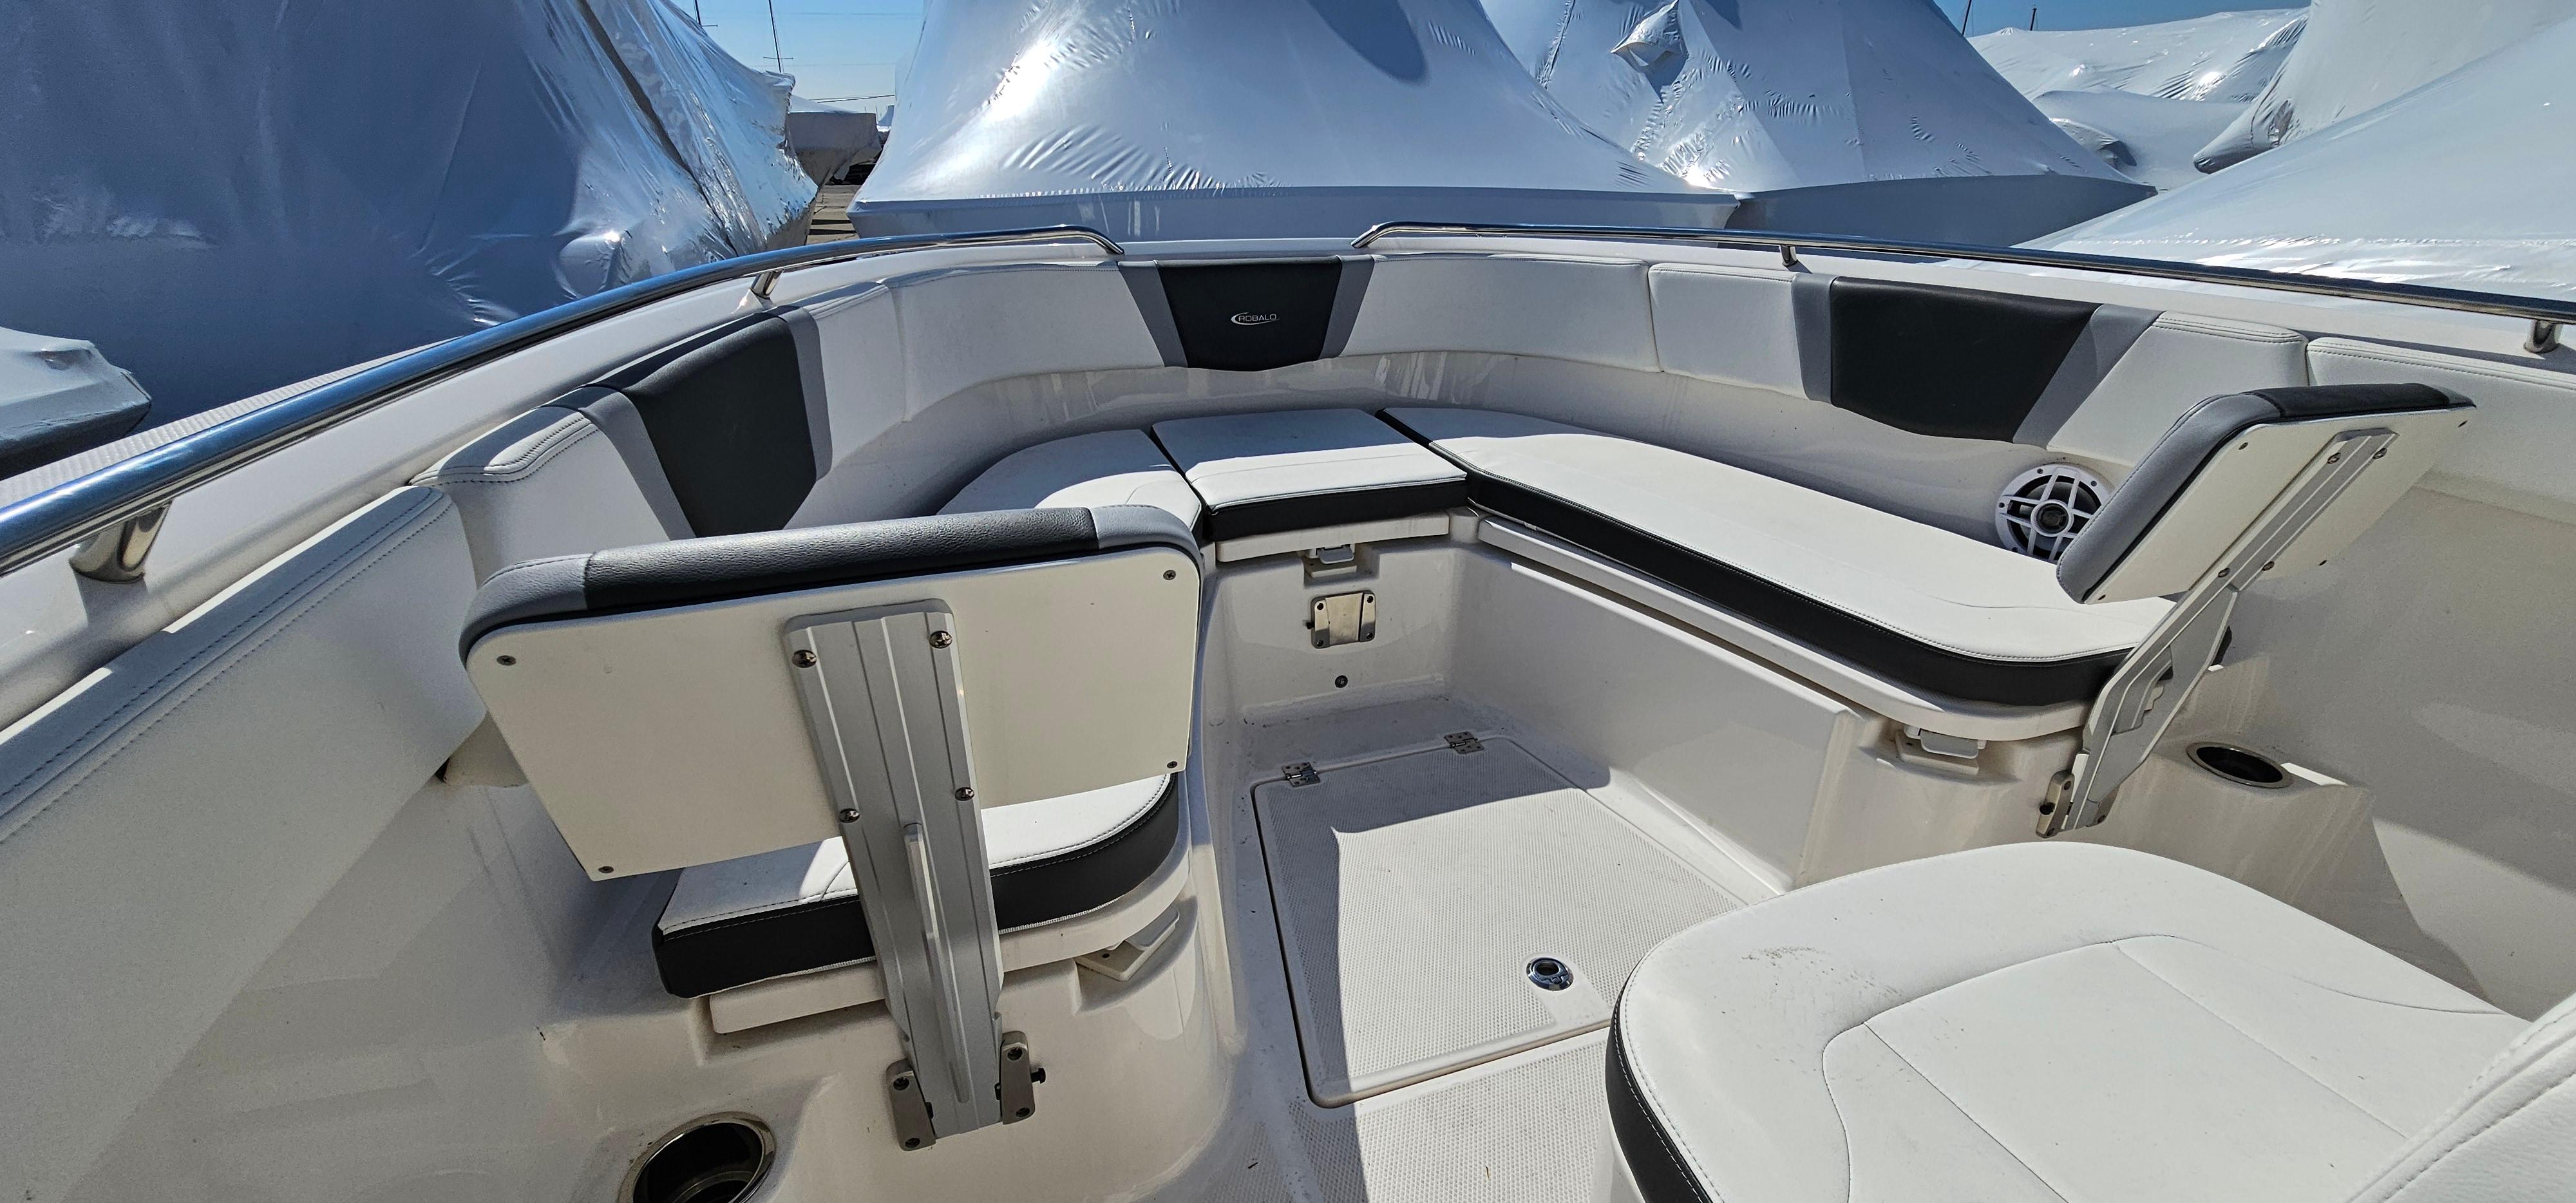 2022 Robalo R272 Center Console Center Console for sale - YachtWorld